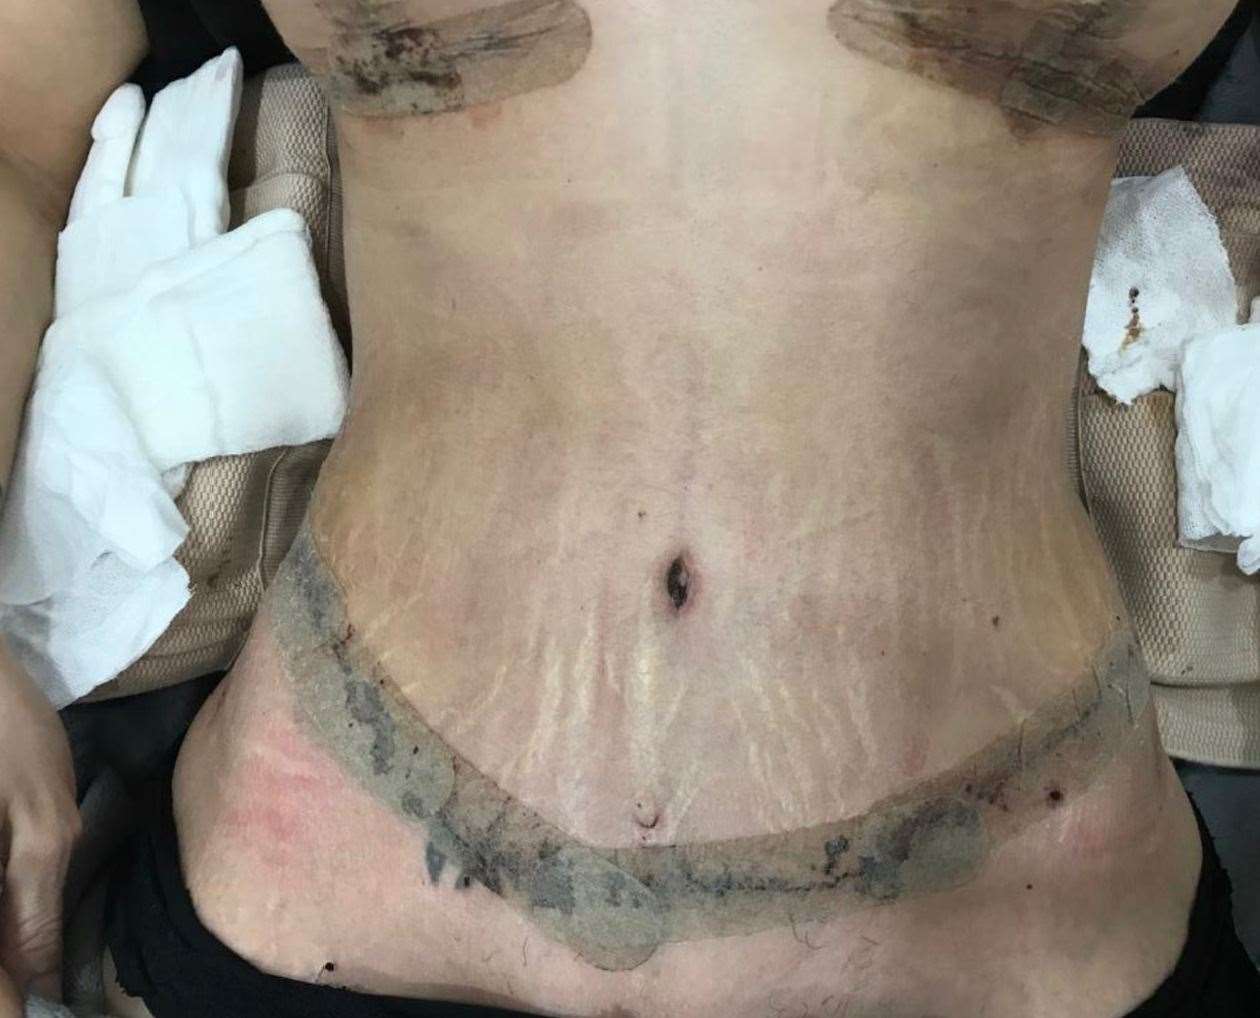 The wounds were taped up after surgery